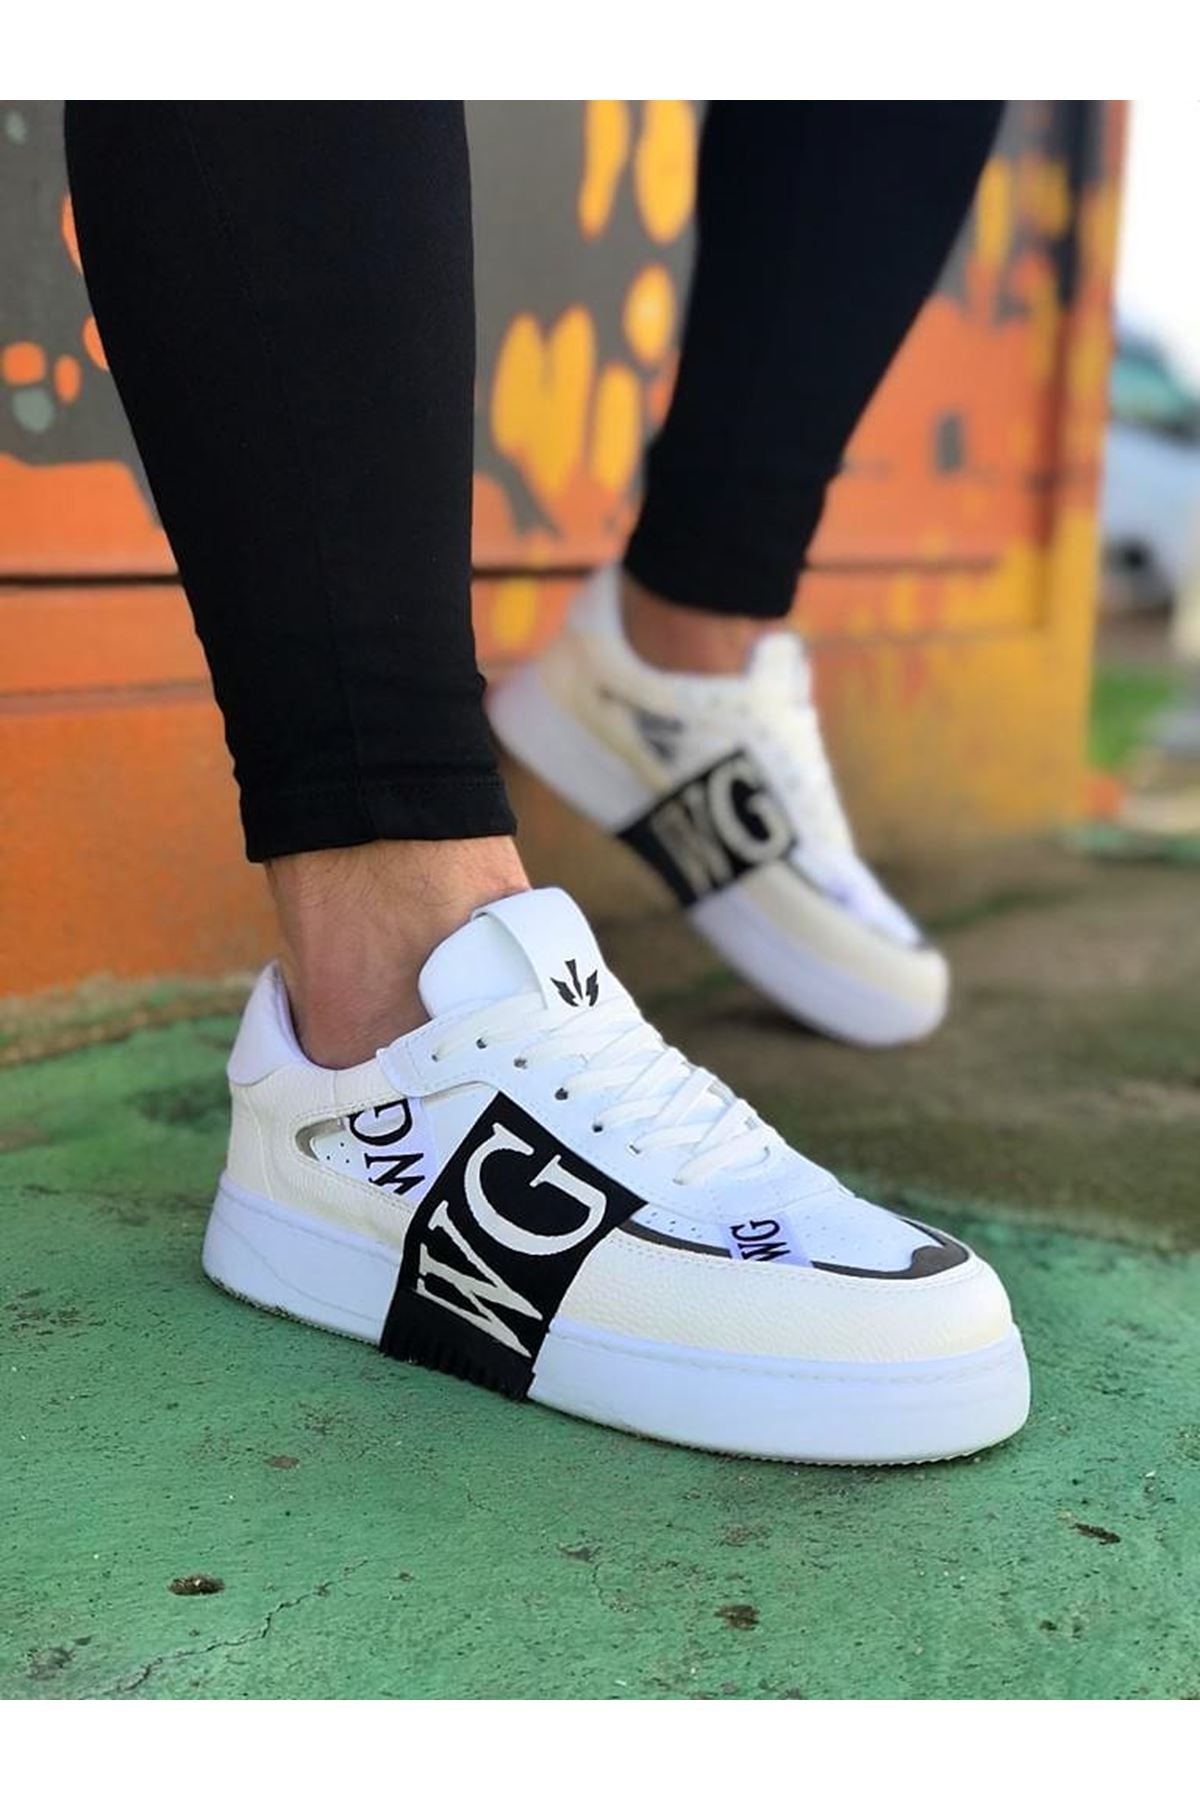 WG202 White Black Men's Casual Shoes sneakers - STREETMODE™